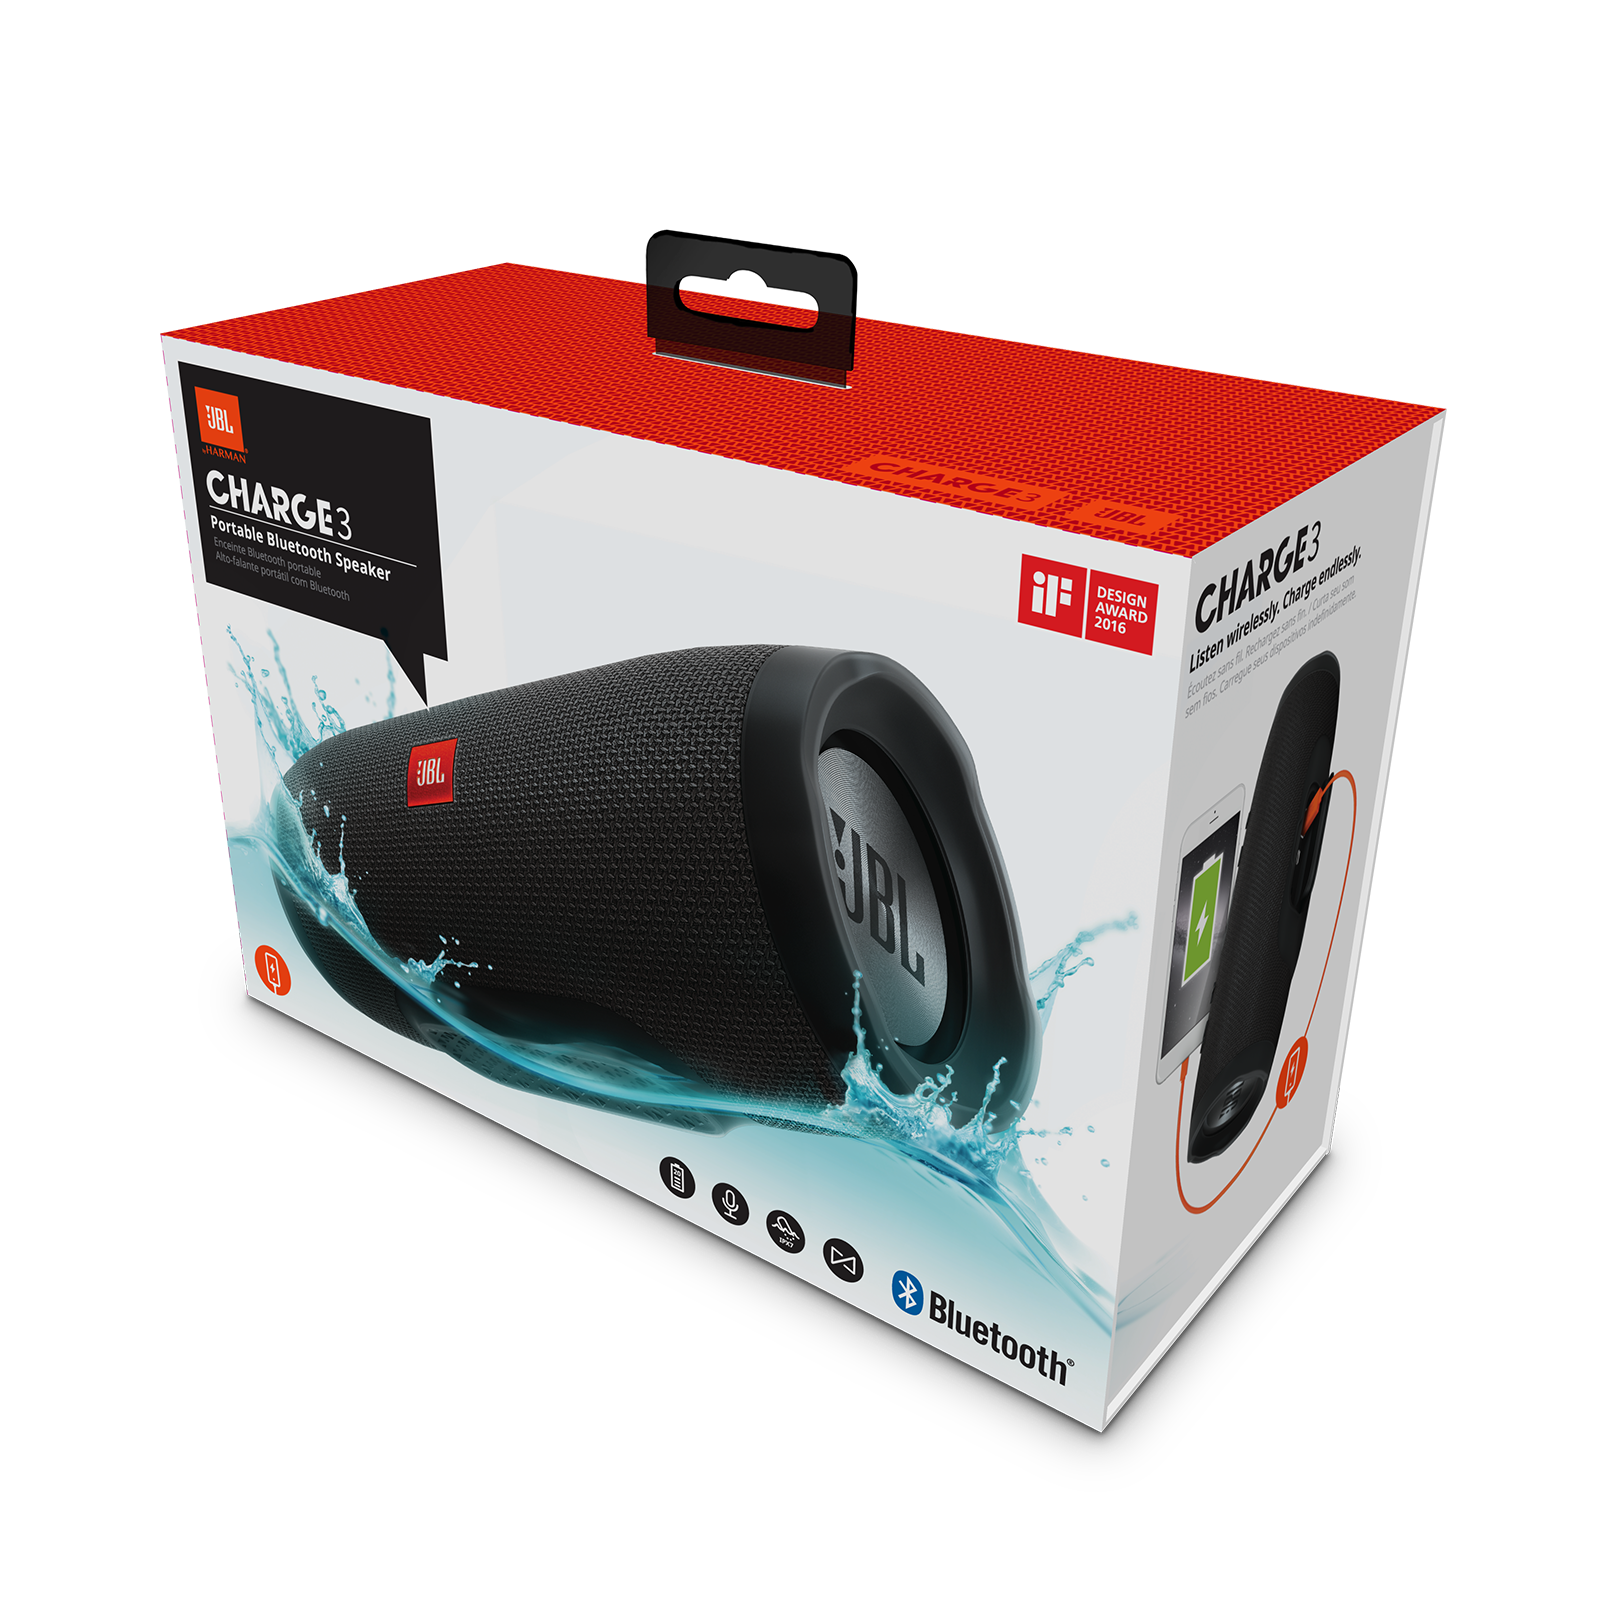 Black JBL Charge 3 Stealth Edition Portable Bluetooth Speaker and Power Bank with Rechargeable Battery Waterproof 